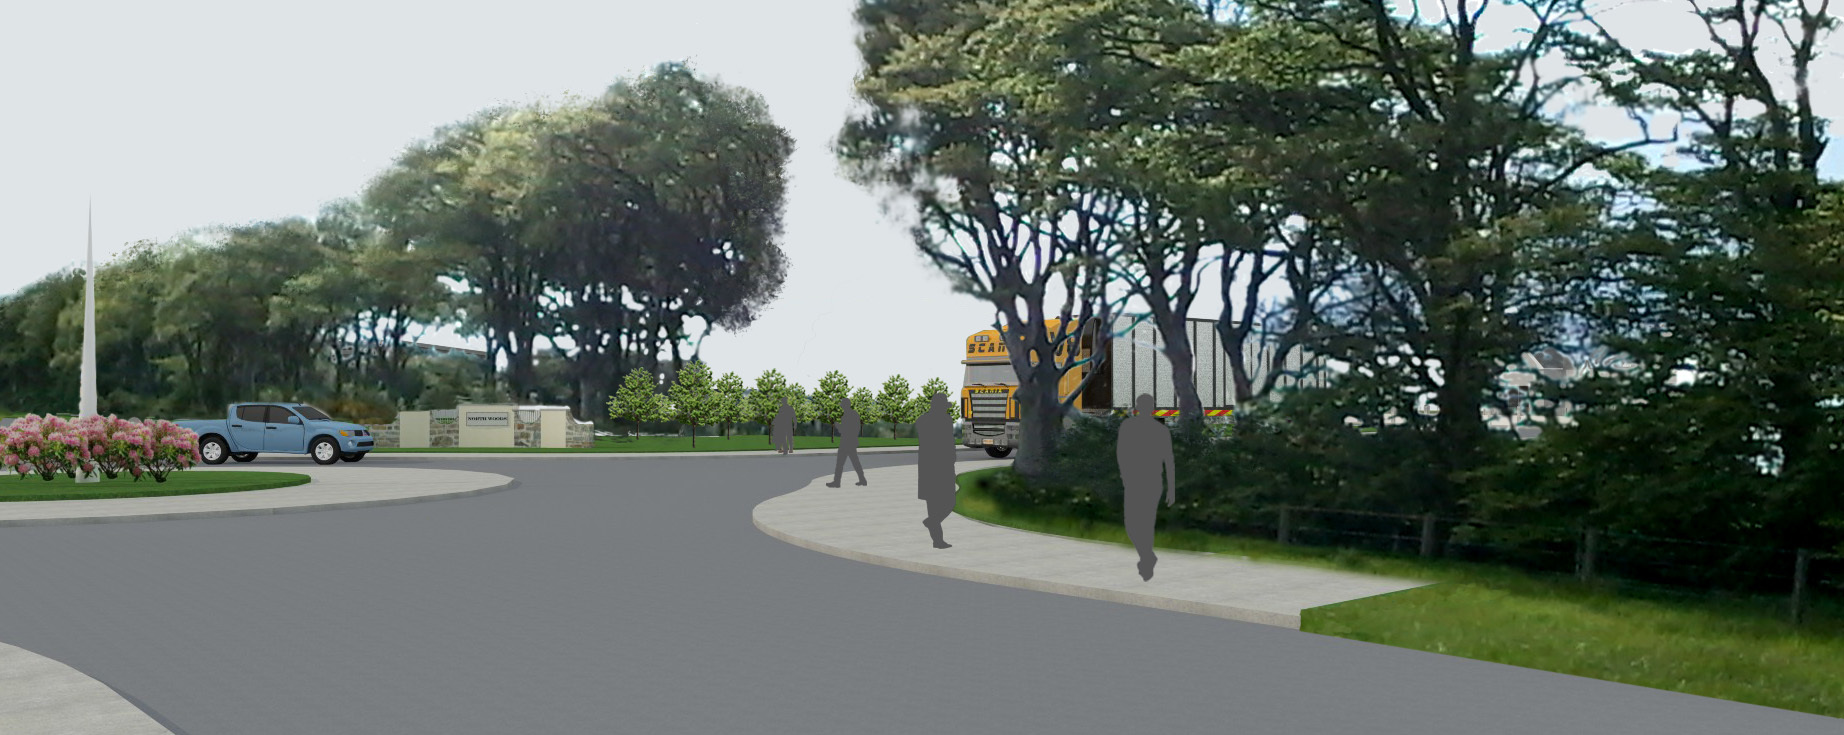 A design of what the entrance to the site would look like.